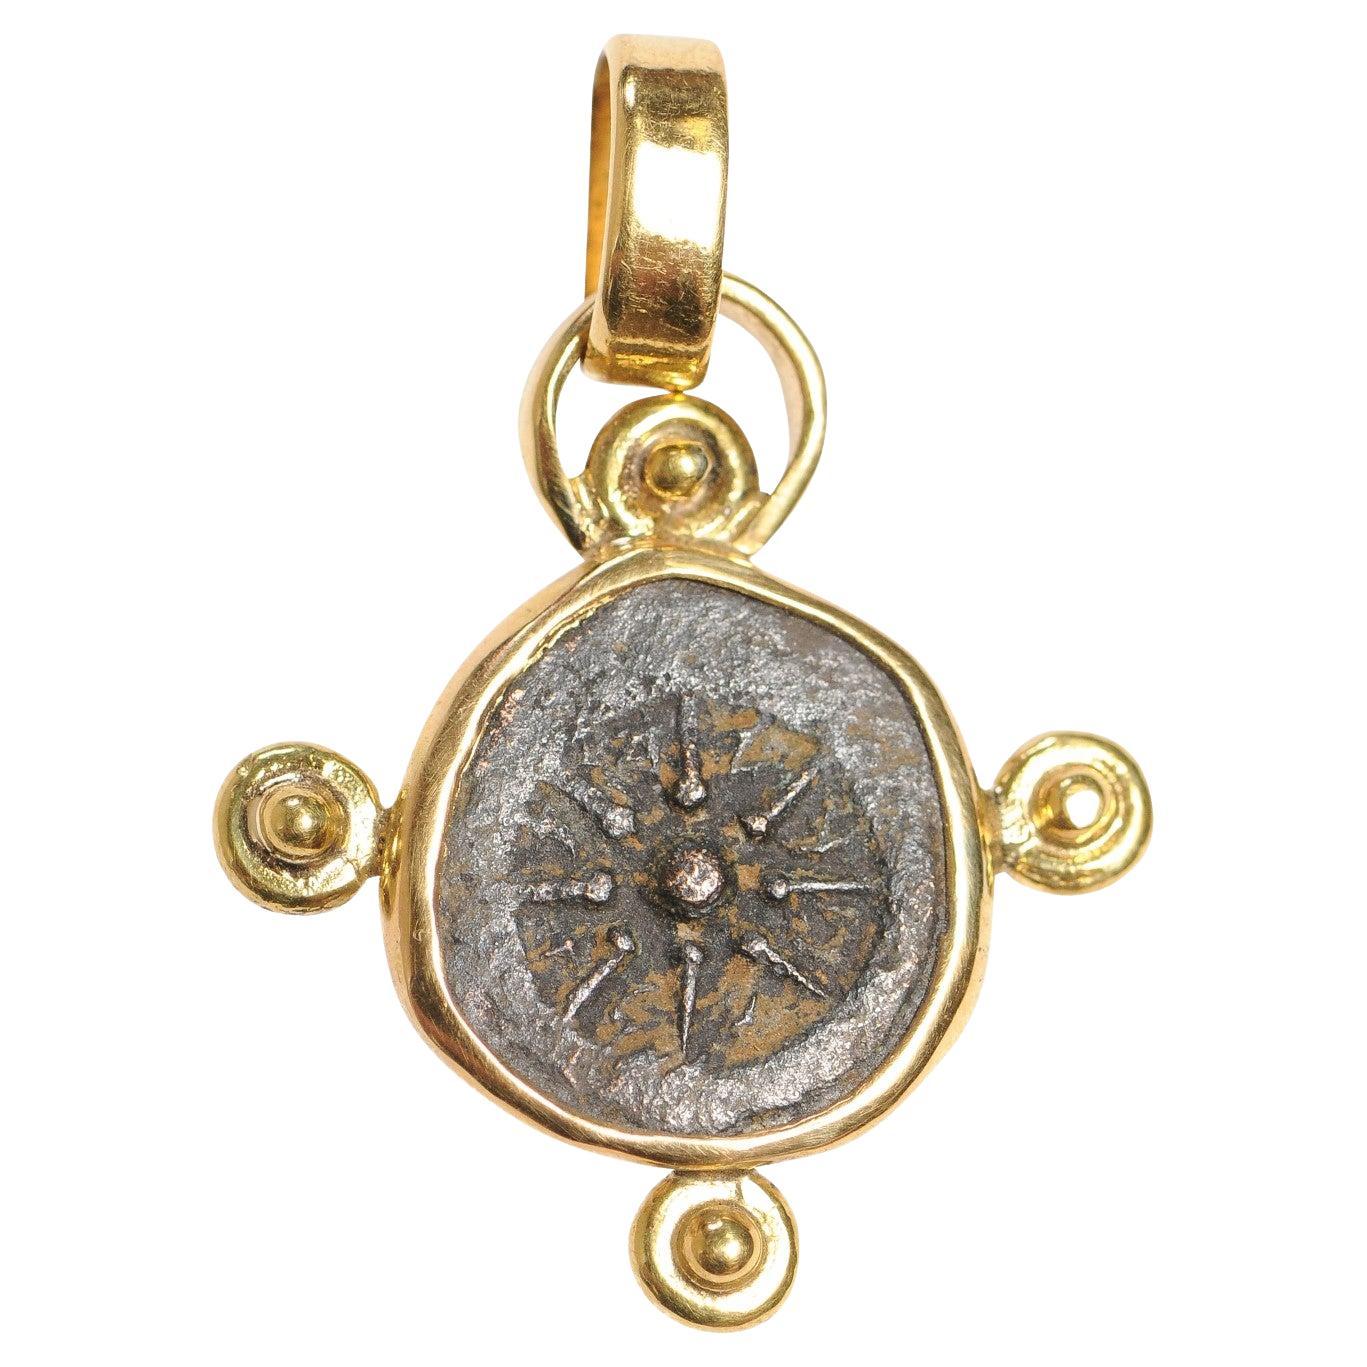 Roman Widow's Mite Coin, 22kt Gold Pendant (pendant only) For Sale